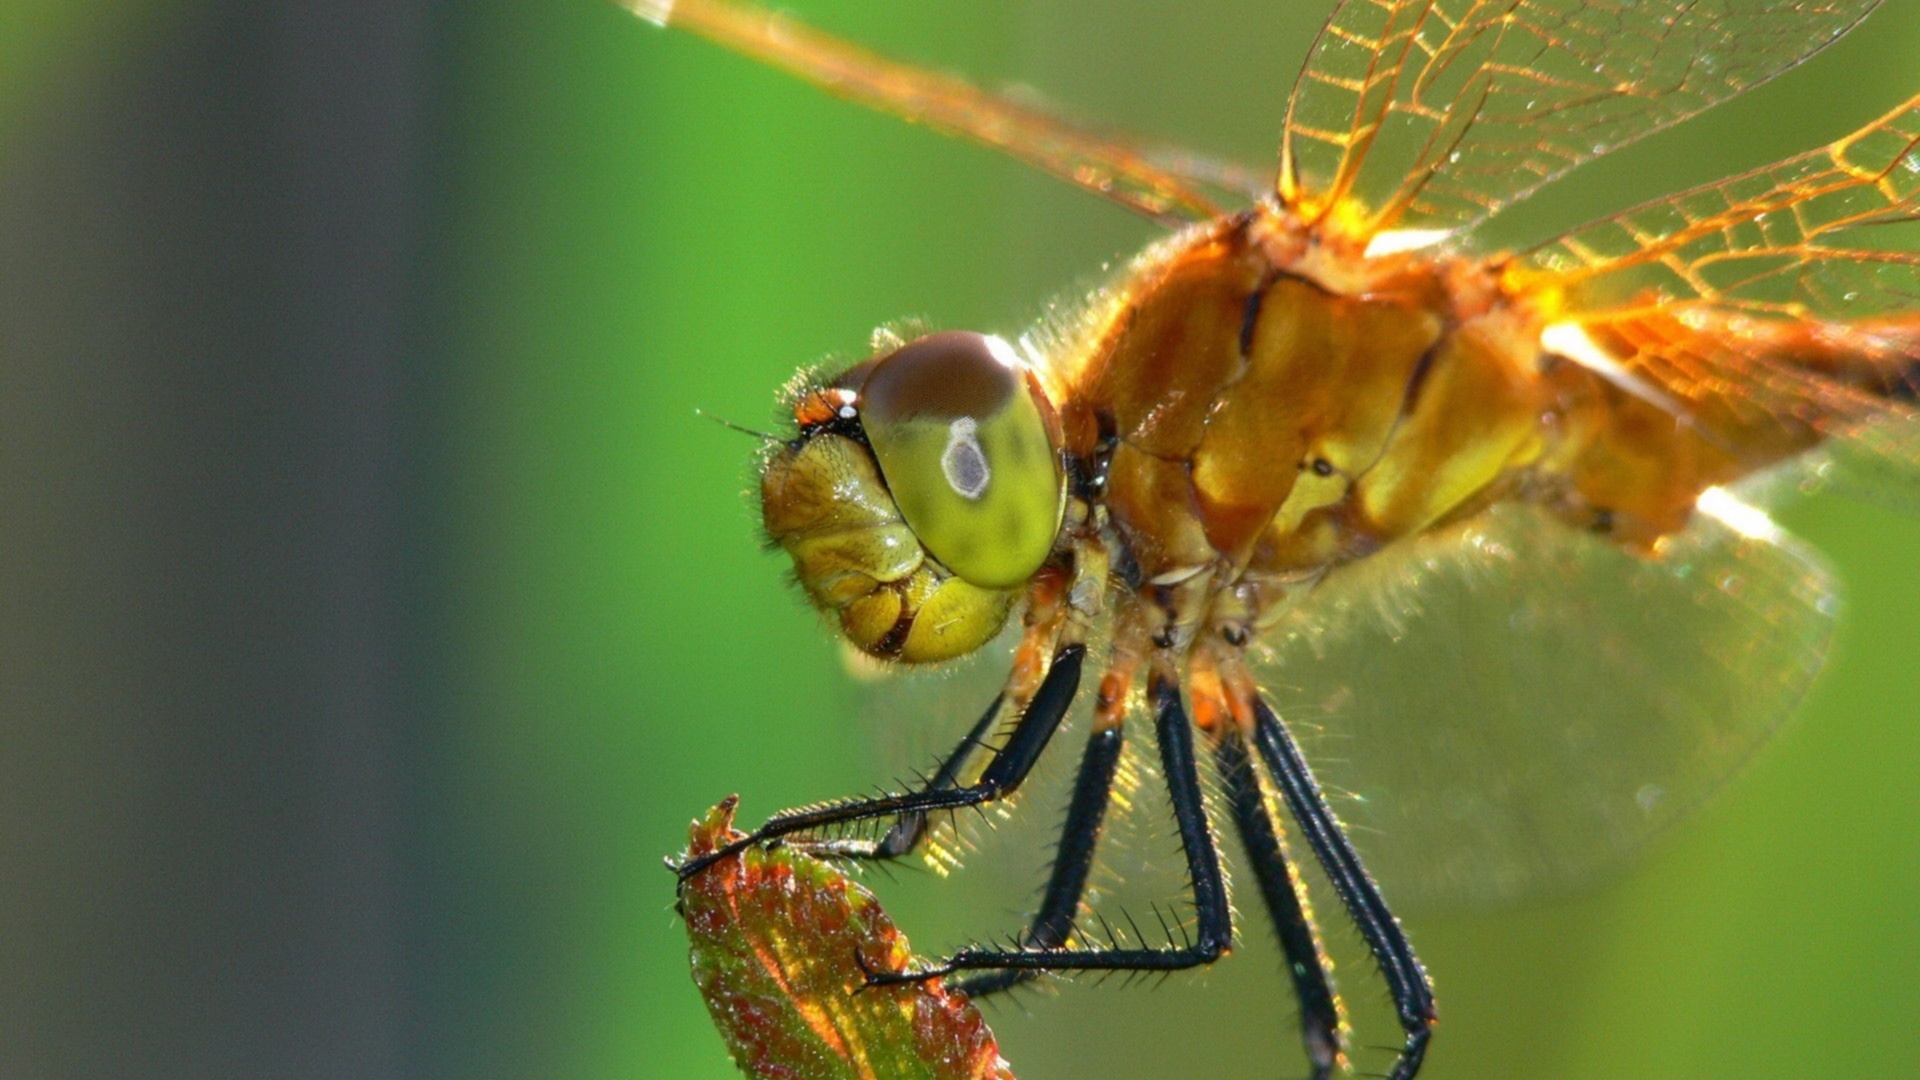 Dragonfly for 1920 x 1080 HDTV 1080p resolution